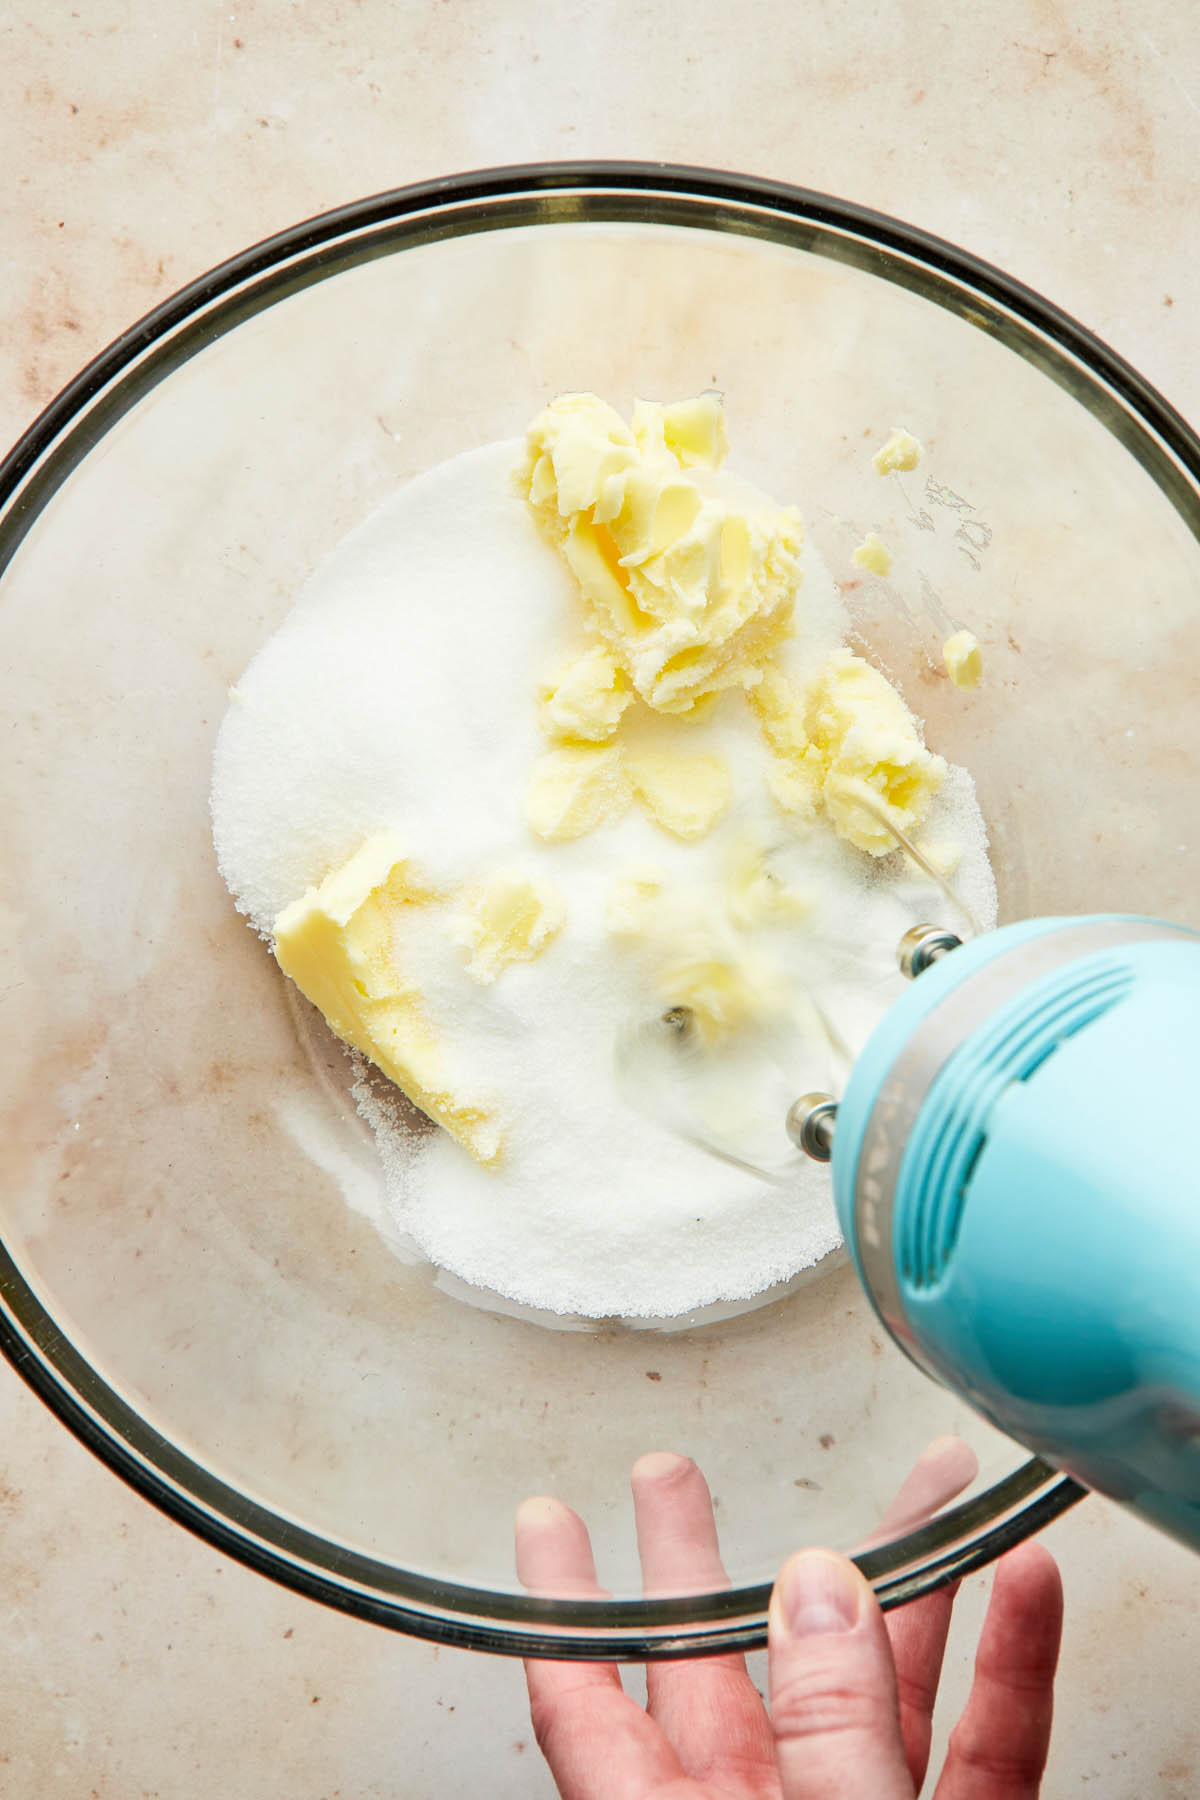 A hand using a hand moxer to cream butter and sugar together in a glass mixing bowl.